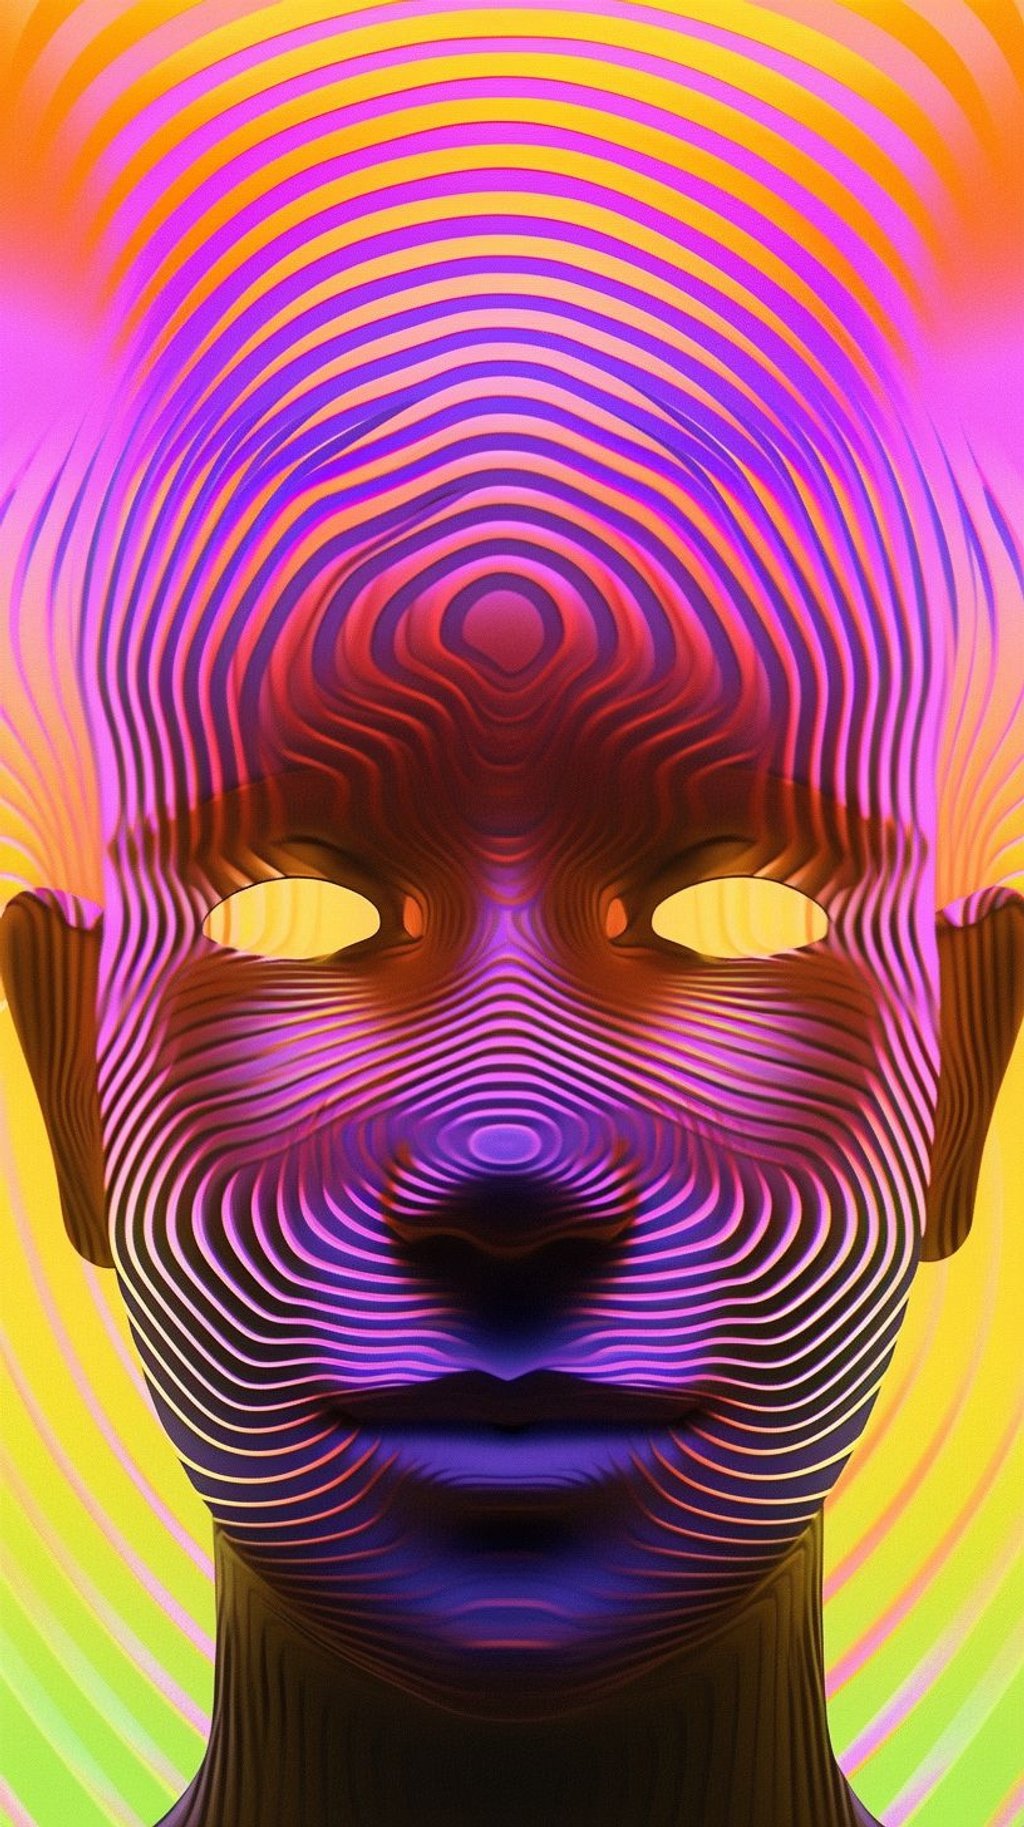 Prompt: a close up of a person's face with lines in the background, 3 d geometric neon shapes, full color catalog print, morph, highly detailed and hypnotic, 2 0 5 0 s, illustration in the golden ratio, medium - format print, symmetrical head and body, newsweek, 70s design, digital illustration radiating